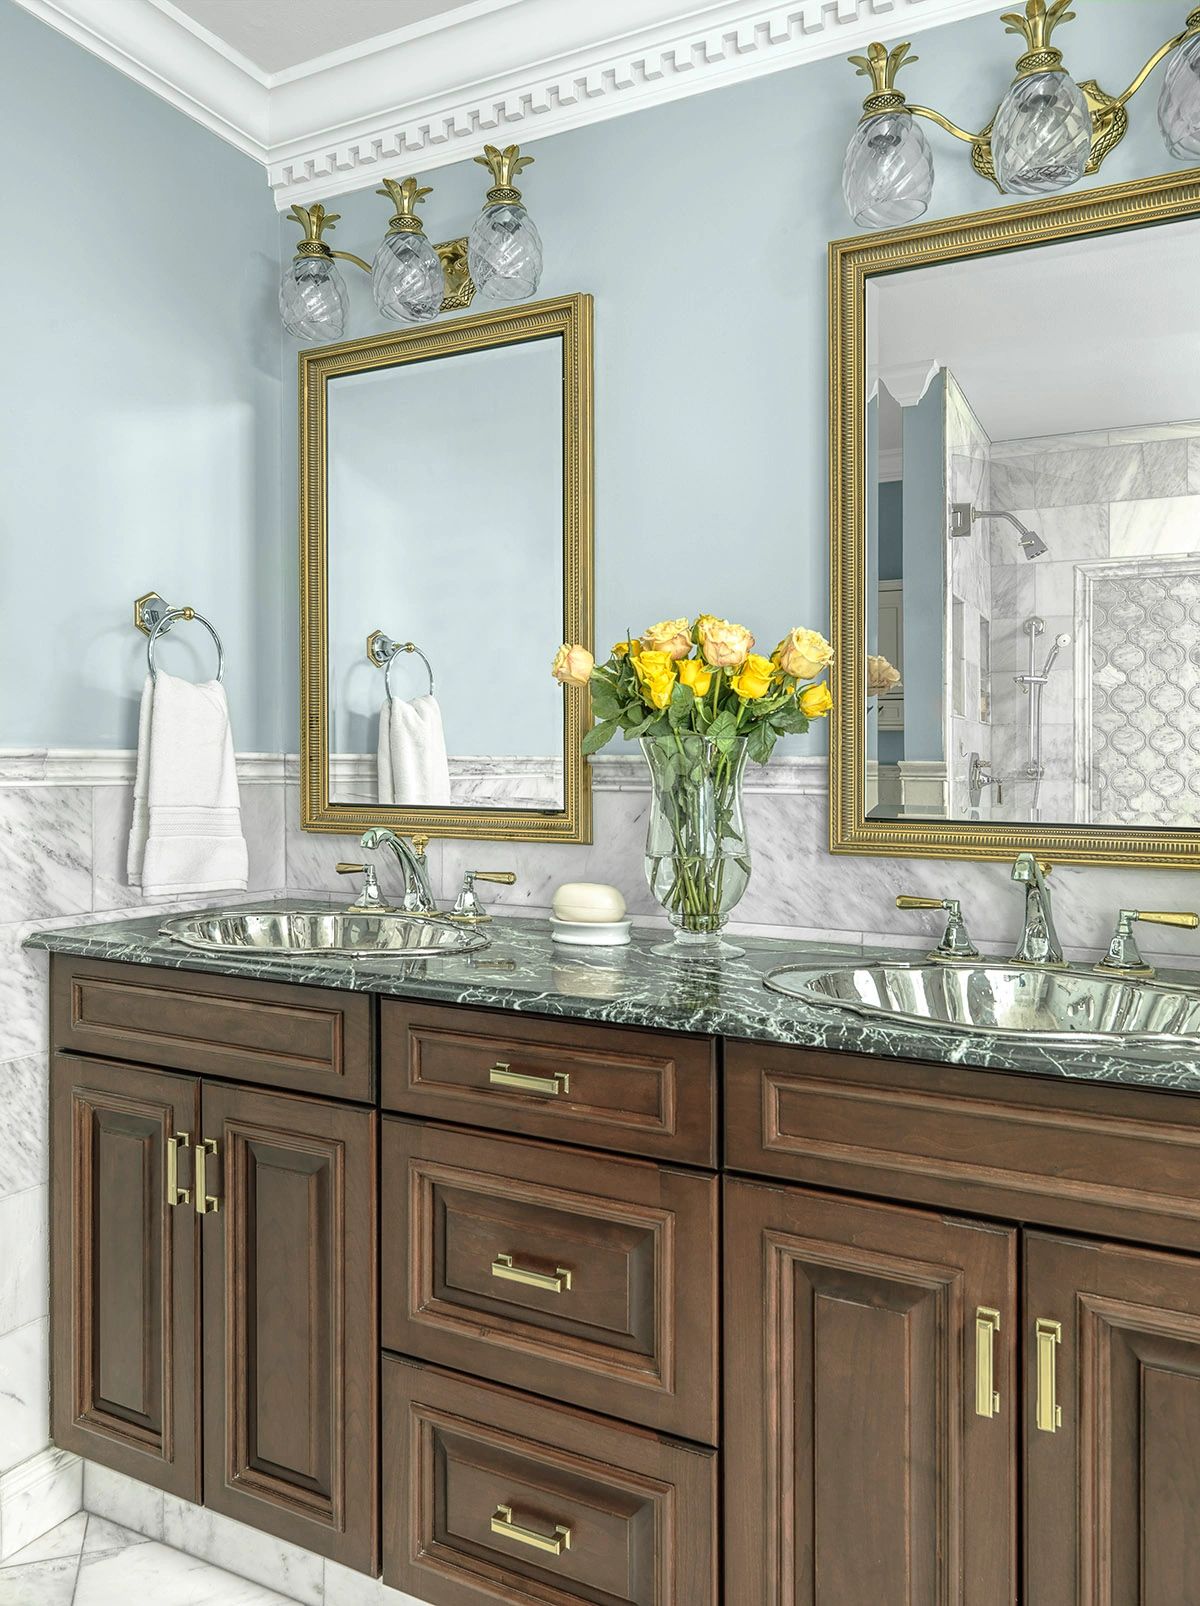 Sink, mirrors, and cabinets